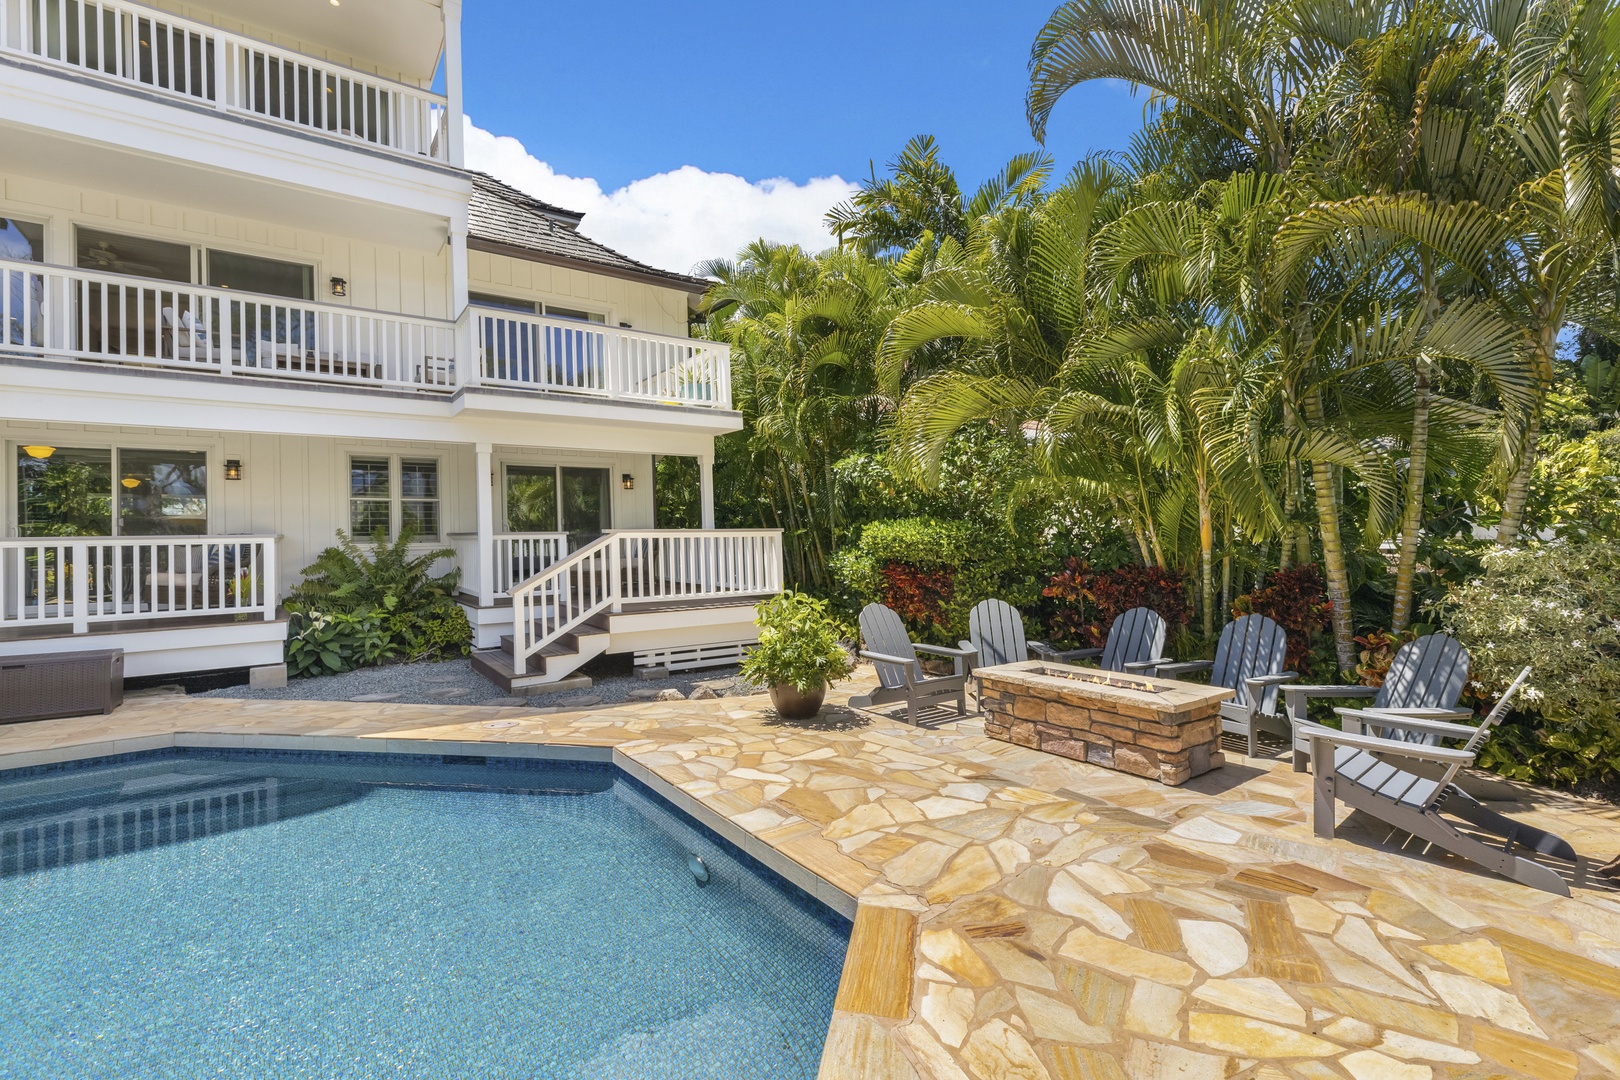 Honolulu Vacation Rentals, Hale Le'ahi - The pool are is the perfect space for entertaining guests outdoors